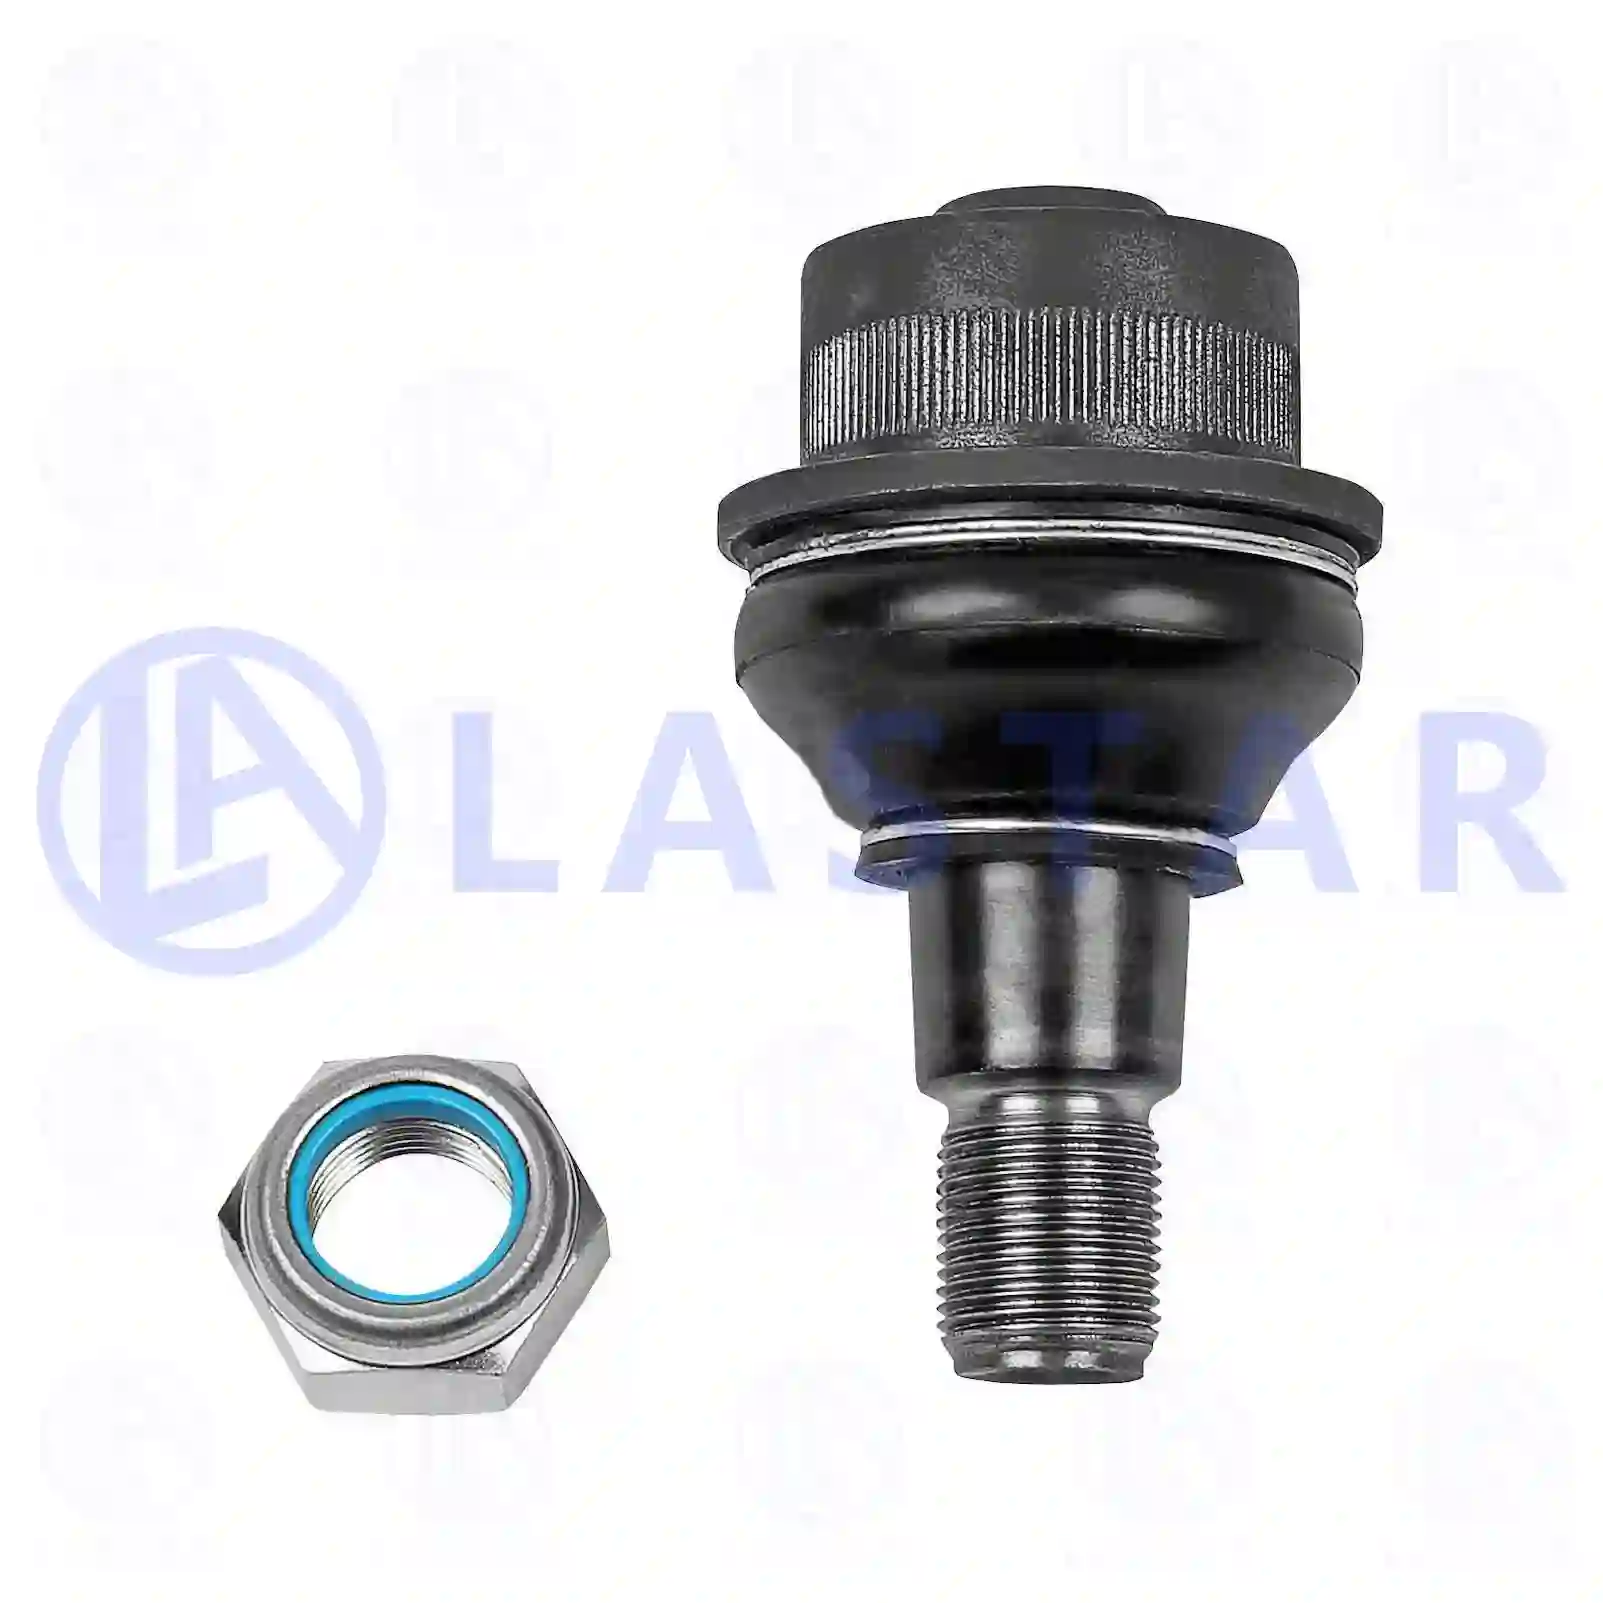 Steering Knuckle Ball joint, control arm, la no: 77730355 ,  oem no:5104075AA, 5139559AA, K05104075AA, 5104075AA, 5139559AA, K05104075AA, 9012220627, 9013330427, 9013330627, 9013330727, 9013331027, 9013331127, 9013331227, 9013331327, 2D0407361, 2D0407361A, 2D0407361B, ZG40342-0008 Lastar Spare Part | Truck Spare Parts, Auotomotive Spare Parts